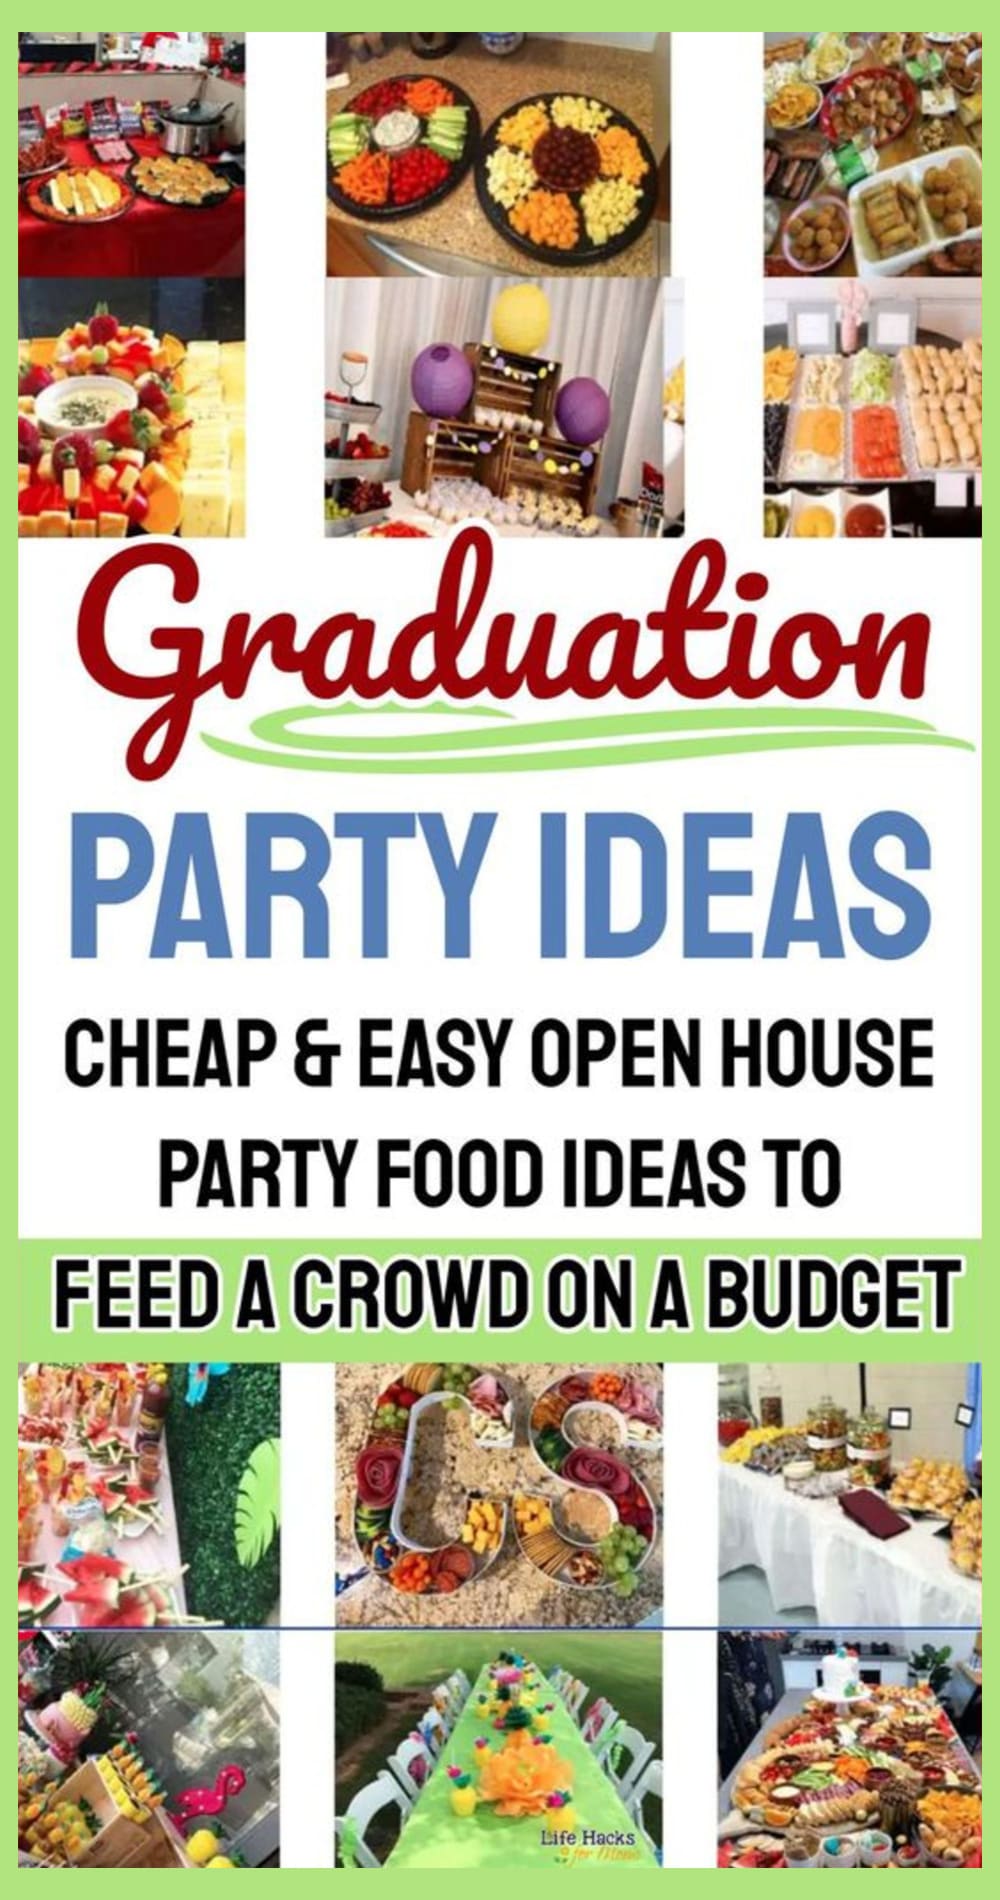 Graduation party ideas - cheap and easy open house party food ideas to feed a crowd on a budget